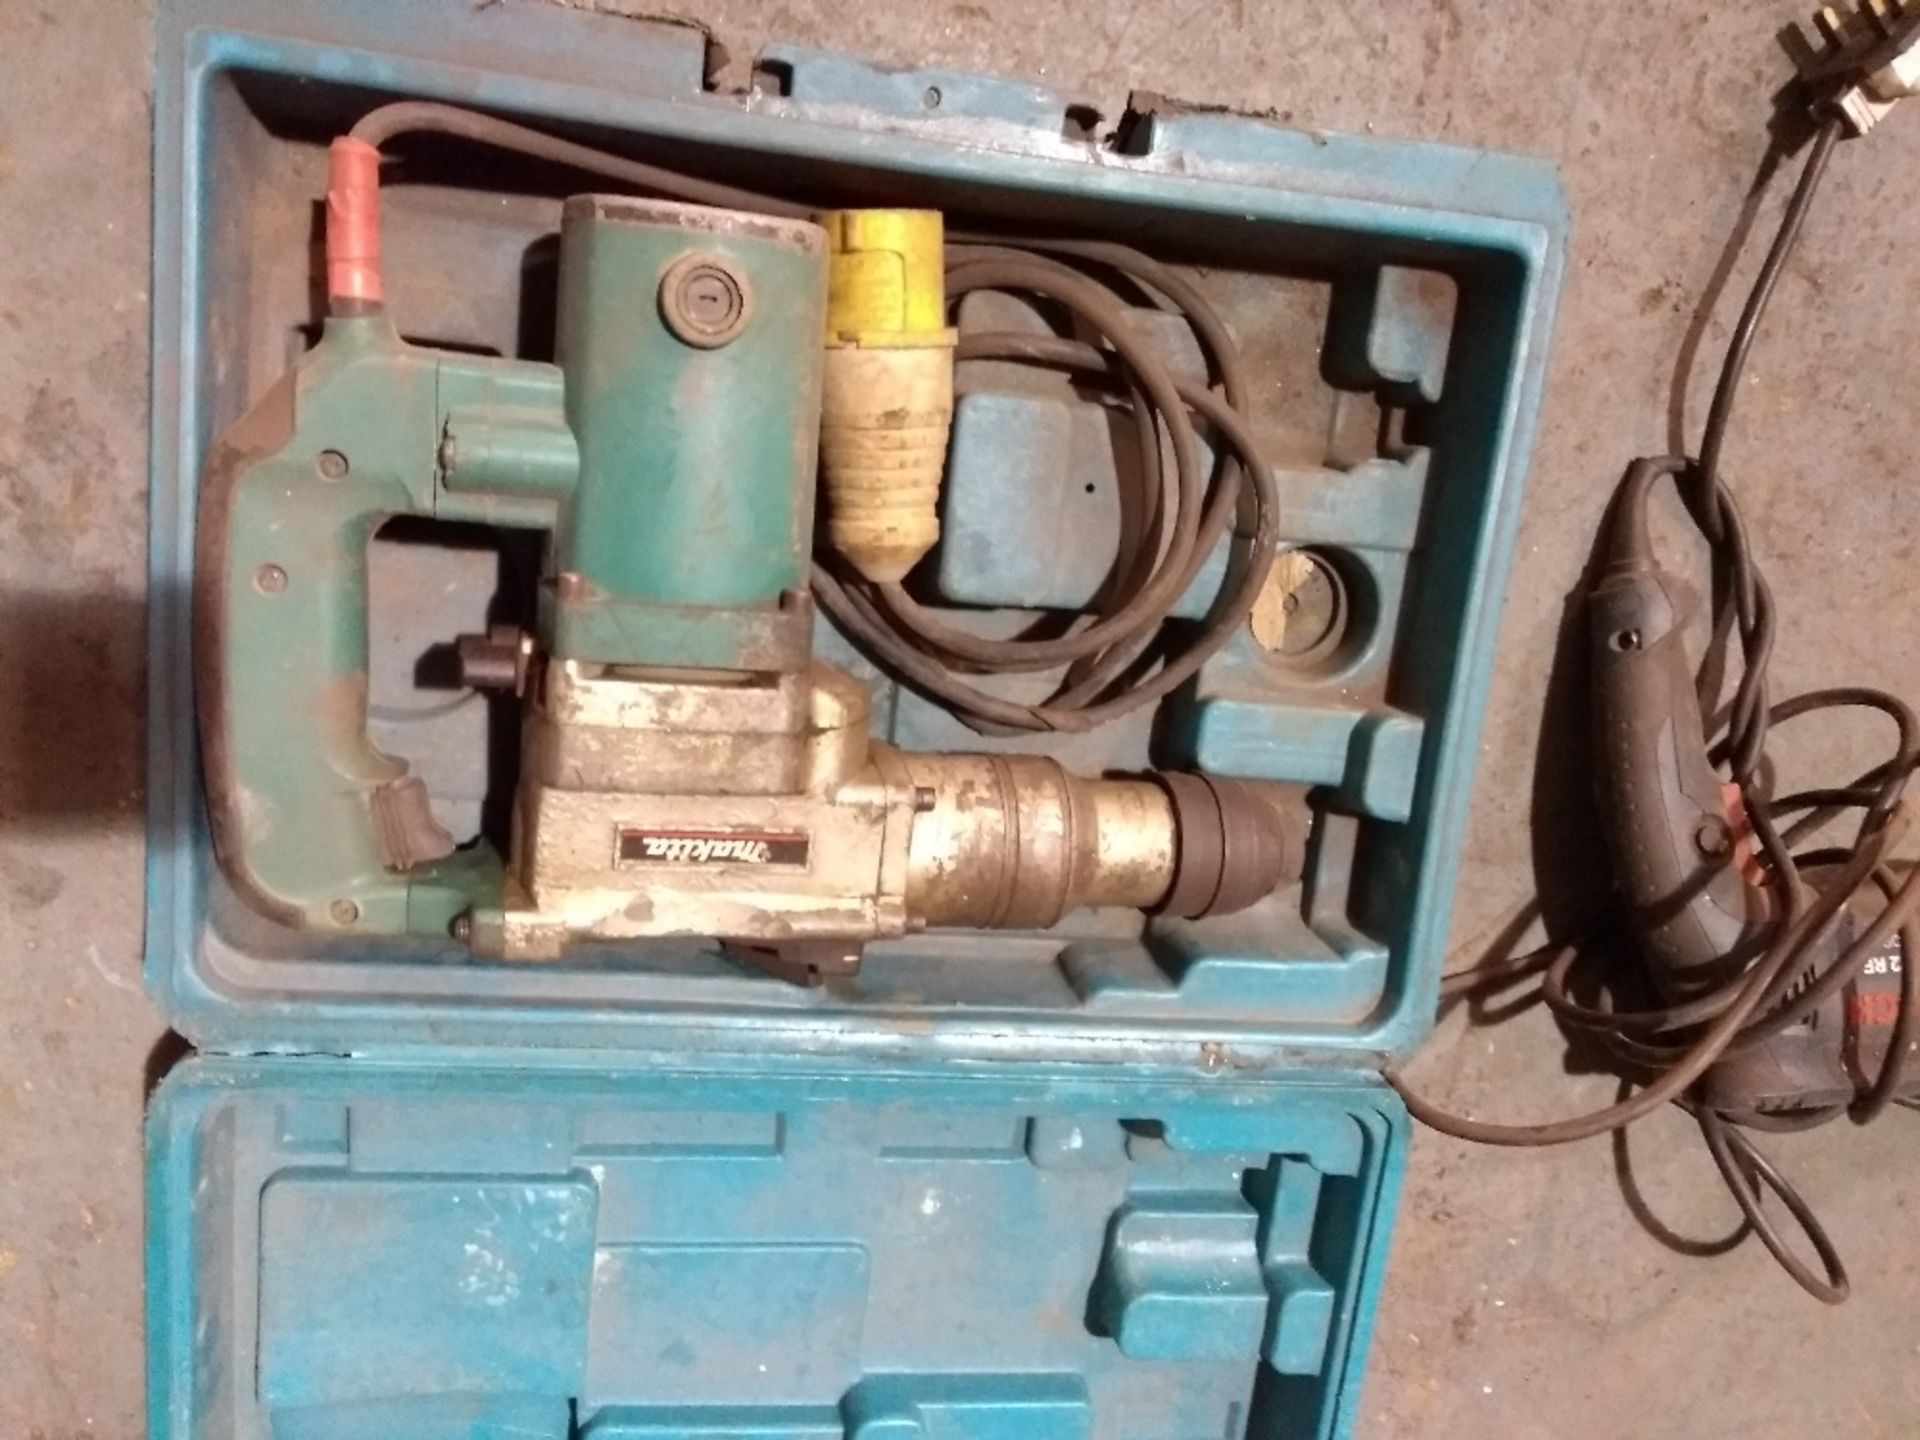 Makita 66015C rotary hammer drill 110V. PAT Test Failed - New lead required.